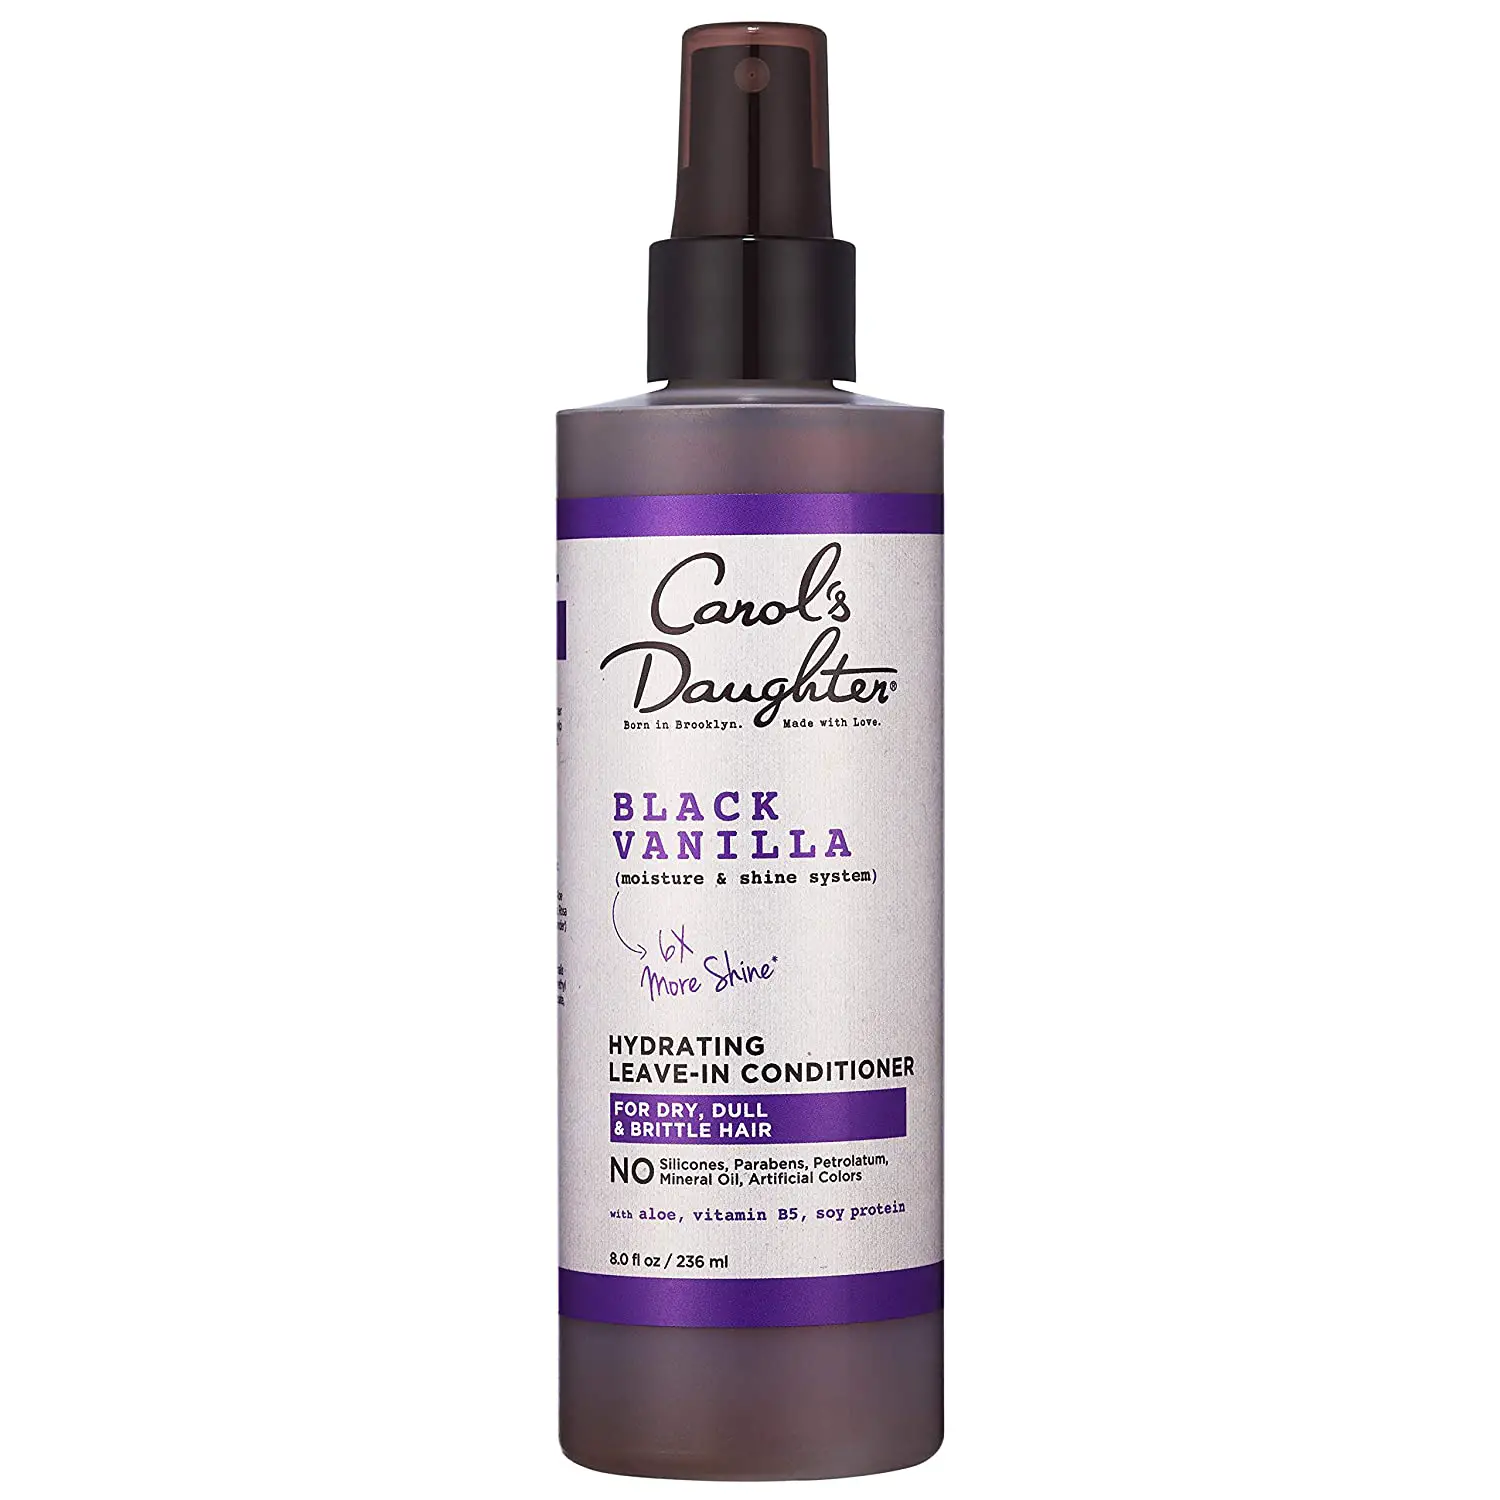 Carol's Daughter Black Vanilla best Moistures for natural hair and Shine Leave-in Conditioner